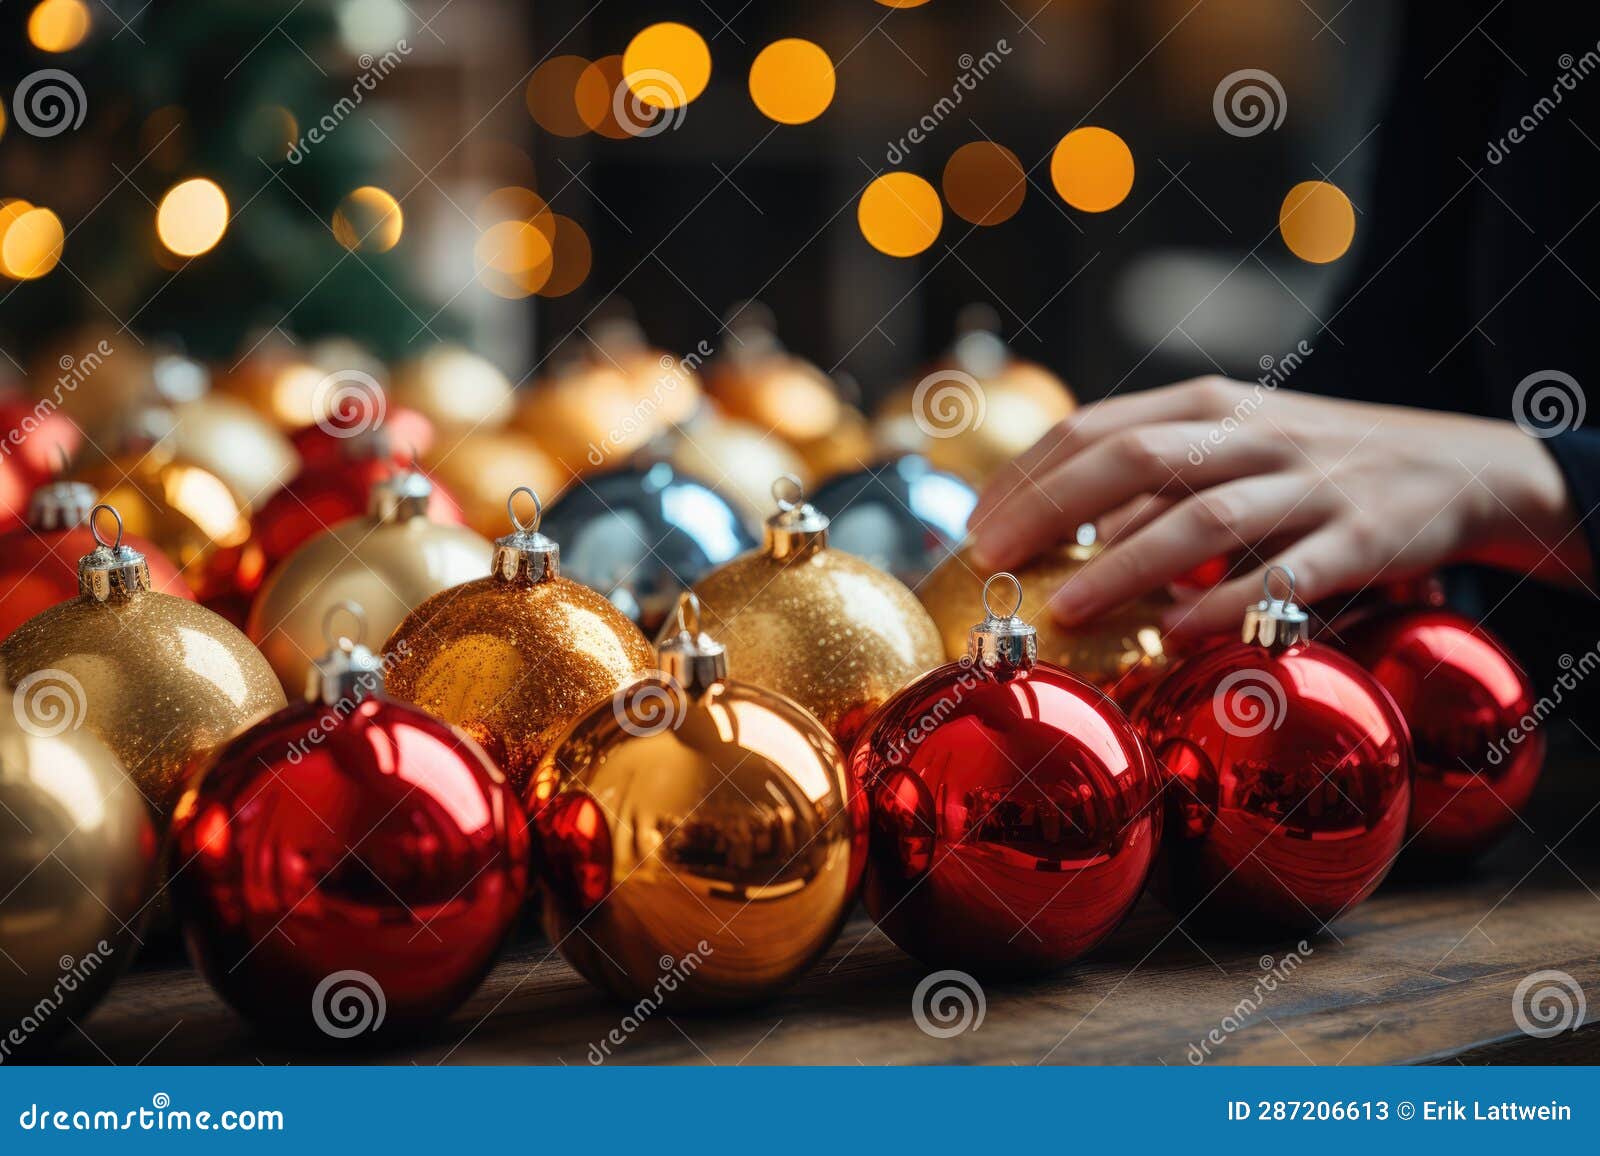 close-up of hands hanging ornaments on a festive tree s - stock photography 